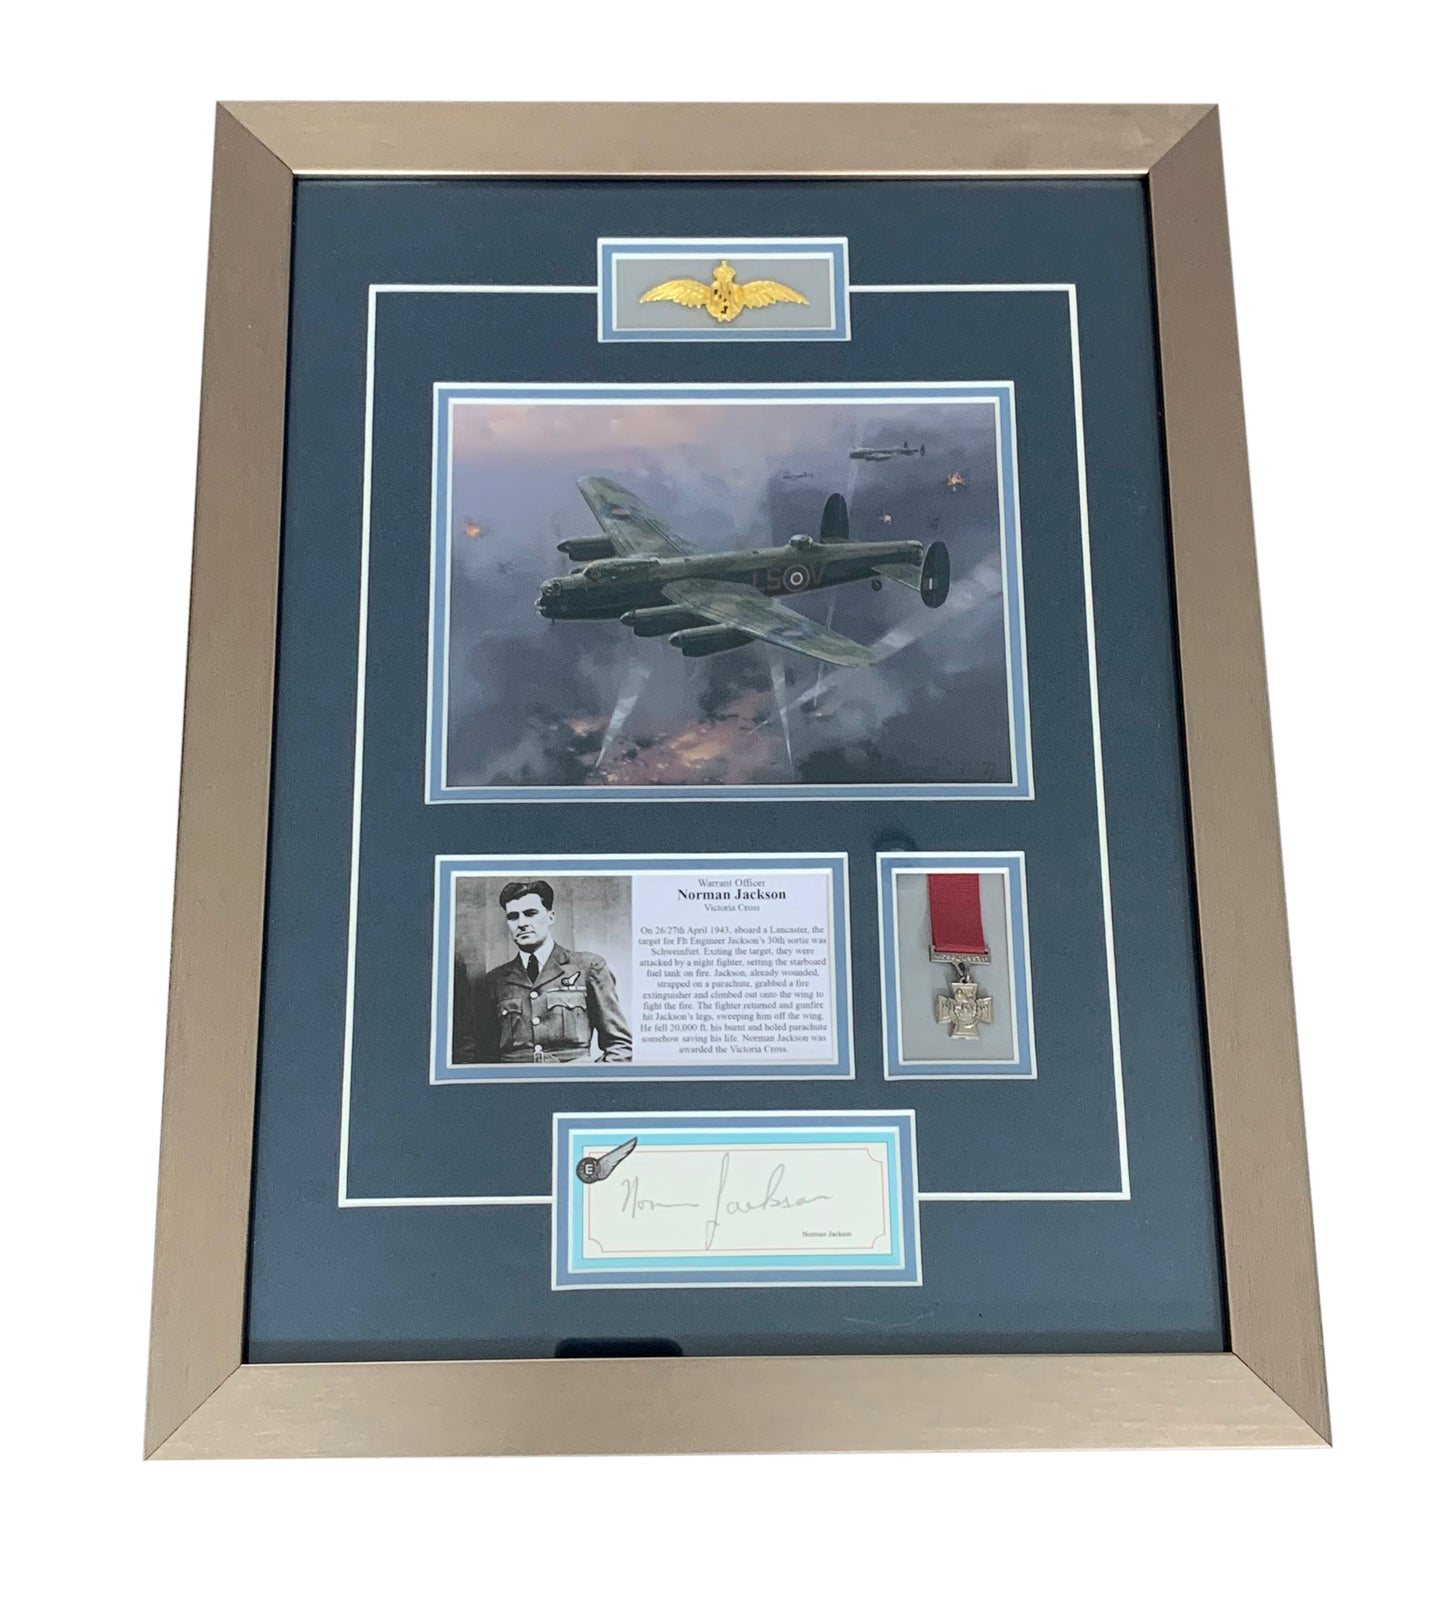 Norman Jackson VC Autographed Original Print Display - Fully Certified